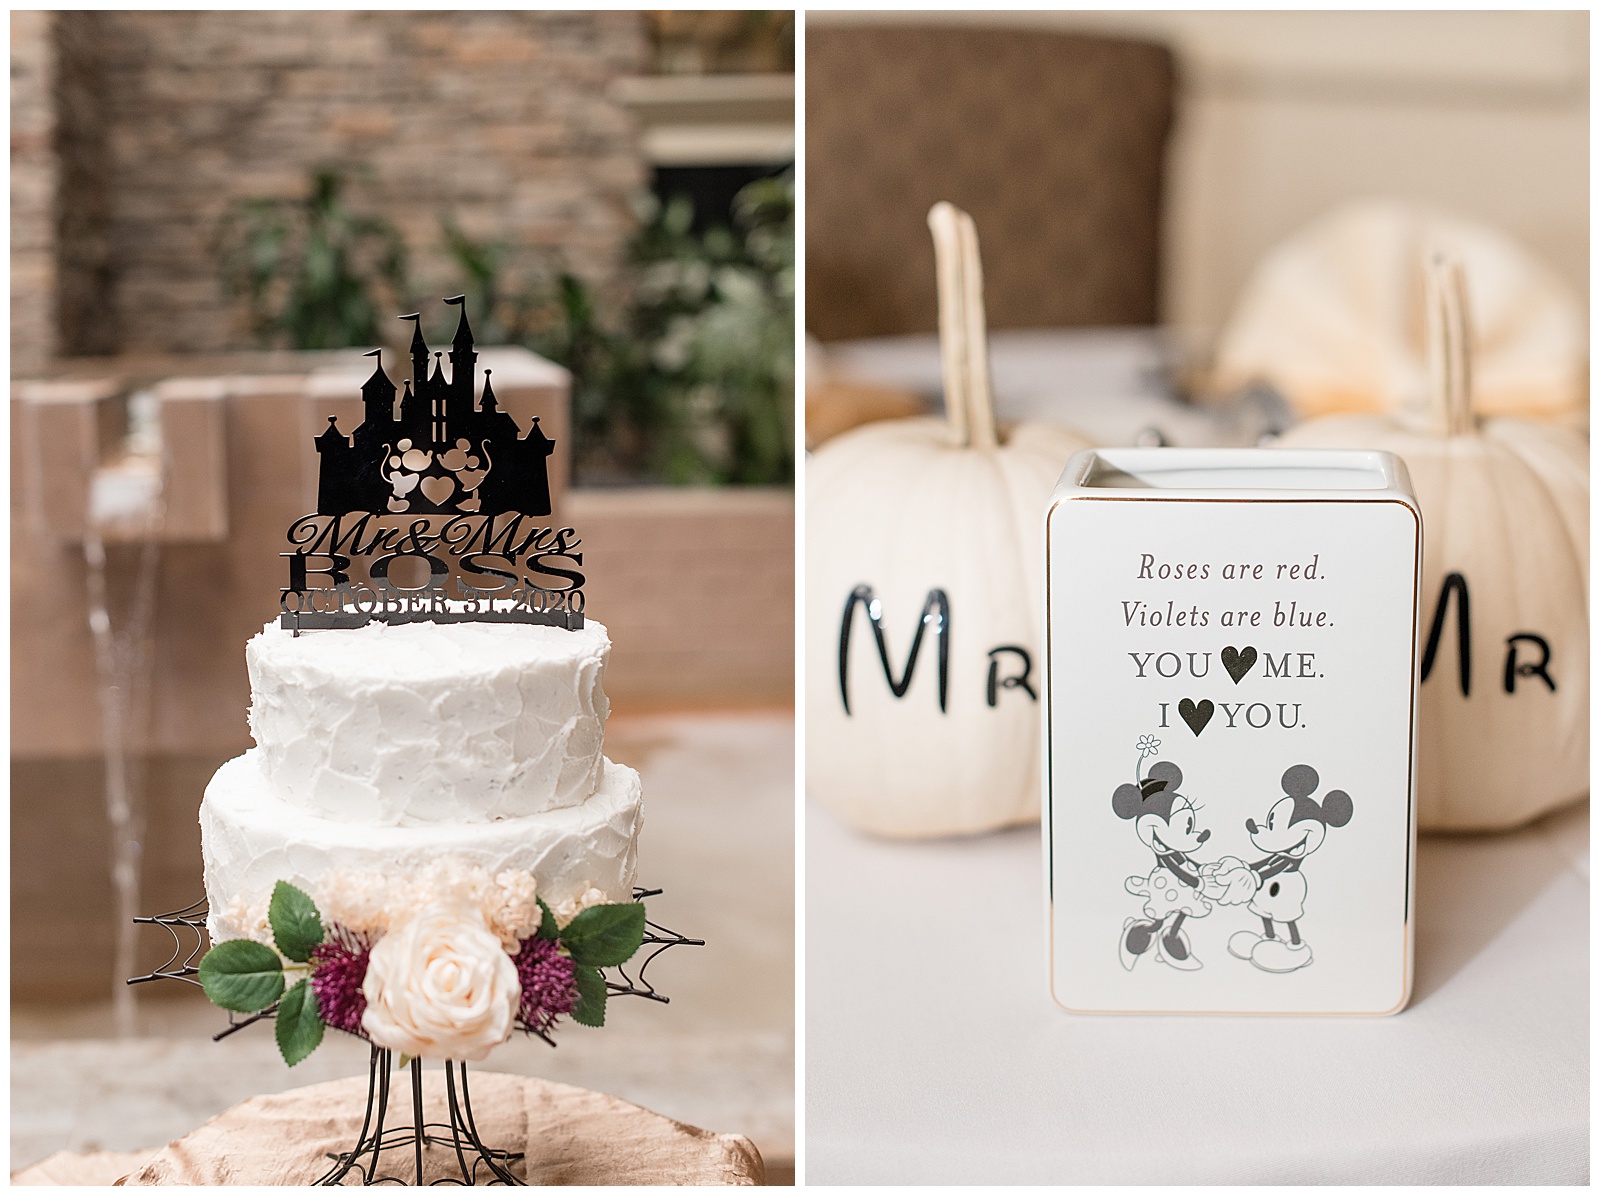 disney themed cake topper and table decorations at reception